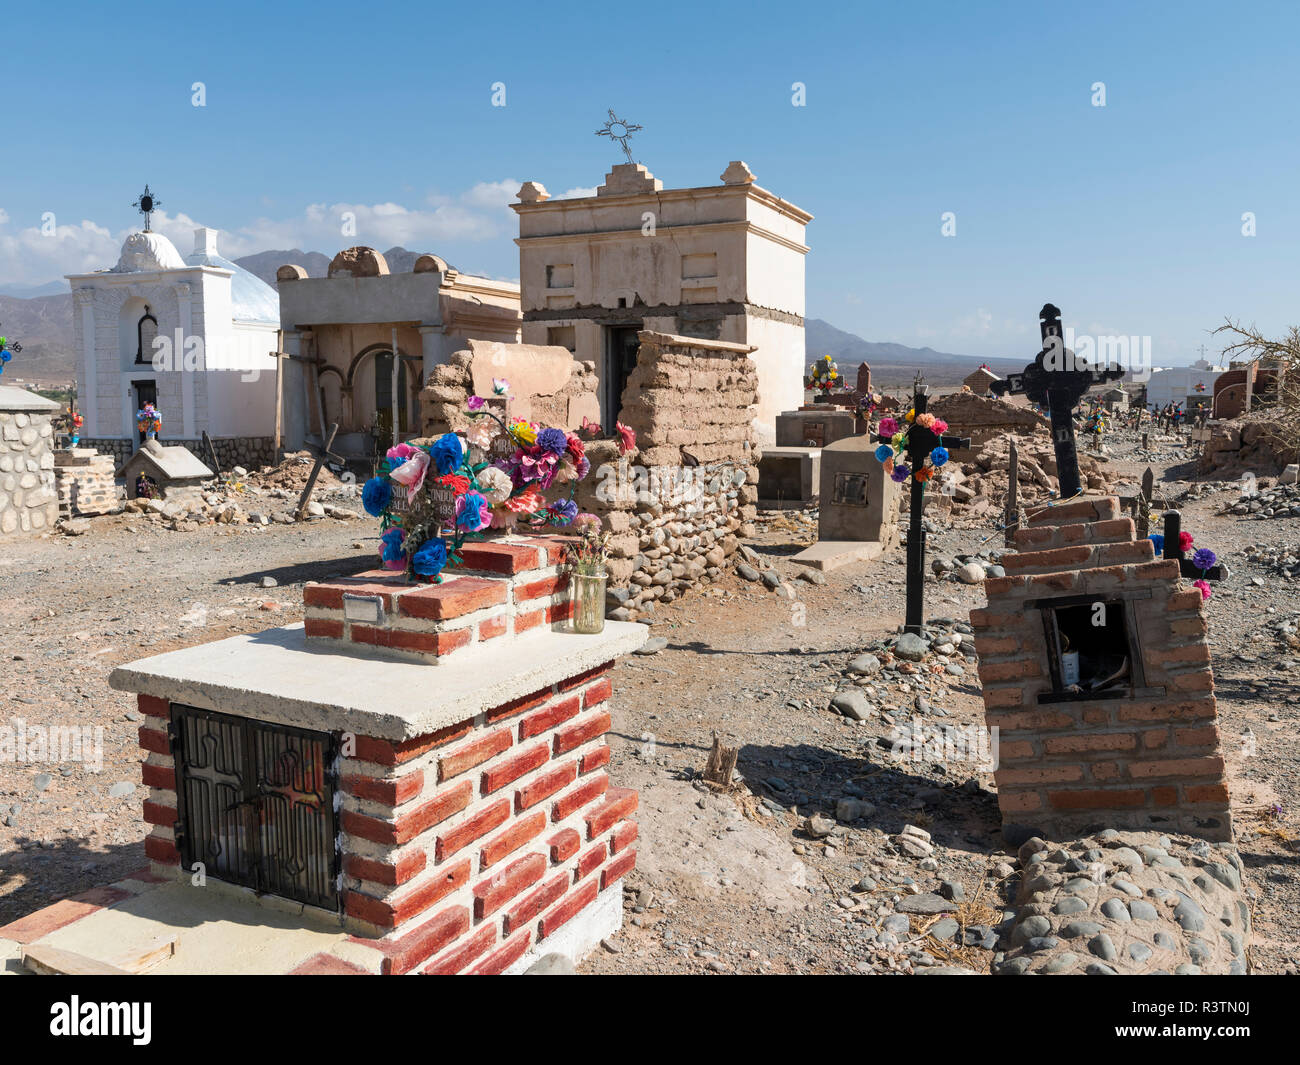 Traditional cemetery. Small town of Cachi in the Valles Calchaquies region, Salta Province. South America, Argentina (Editorial Use Only) Stock Photo